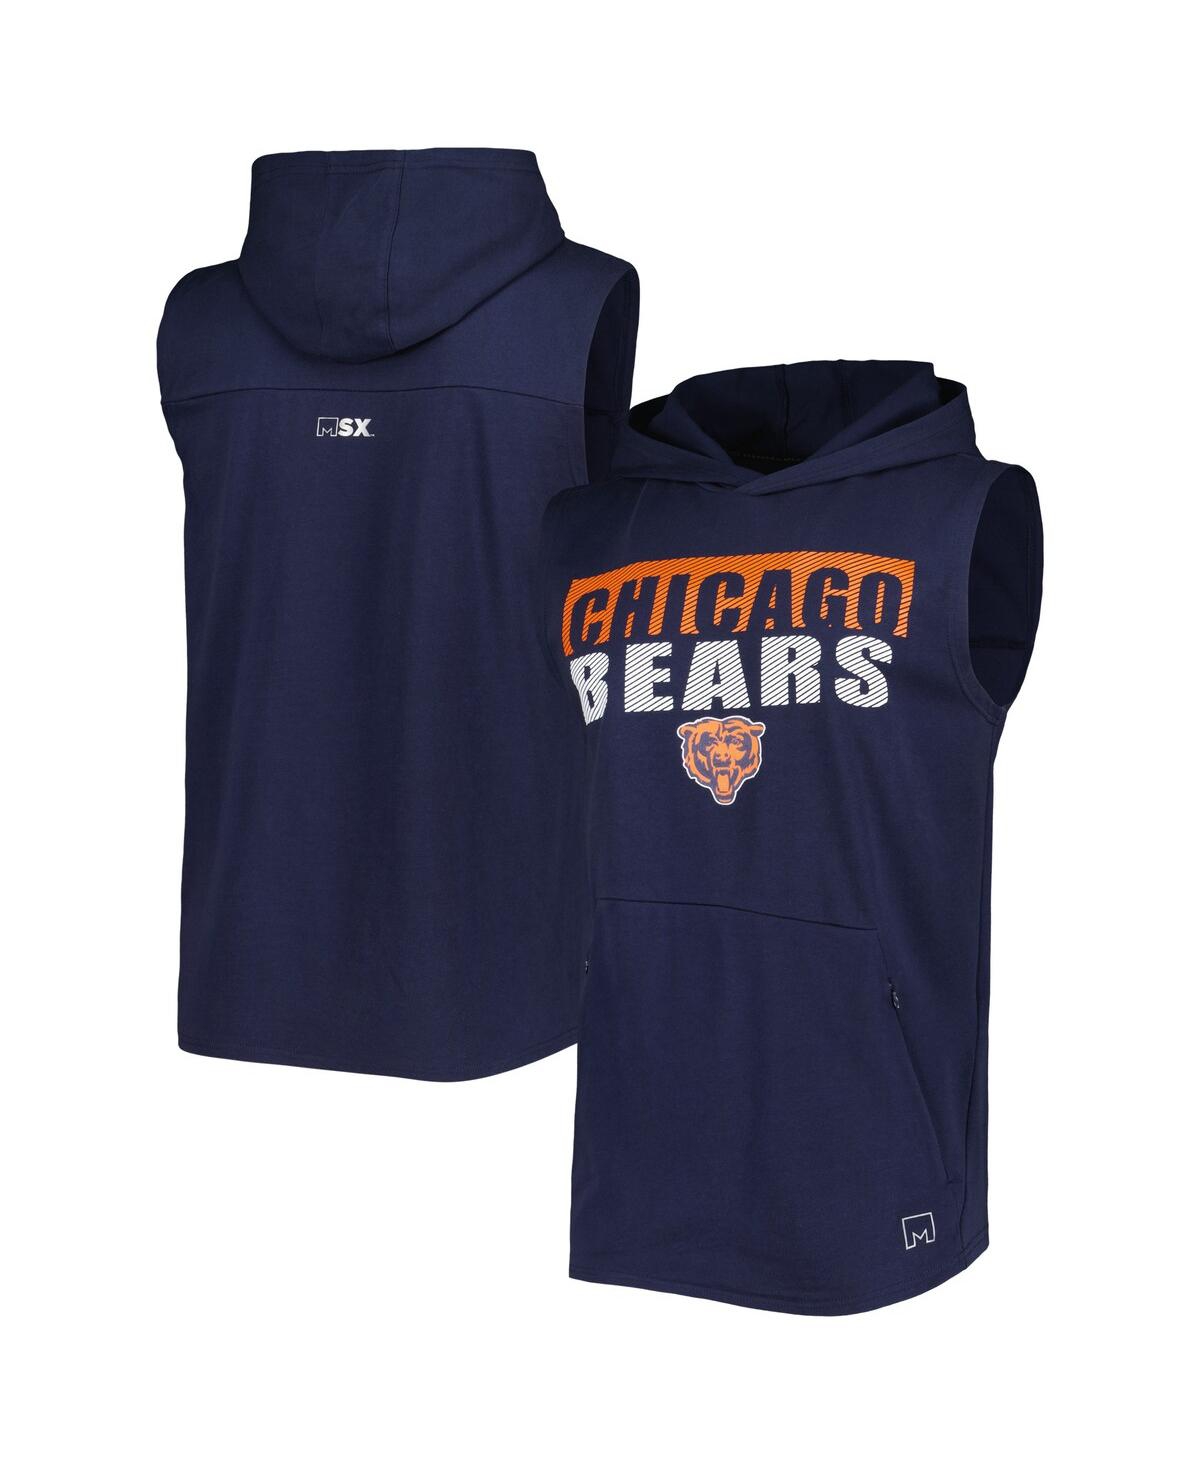 Men's Msx by Michael Strahan Navy Chicago Bears Relay Sleeveless Pullover Hoodie - Navy